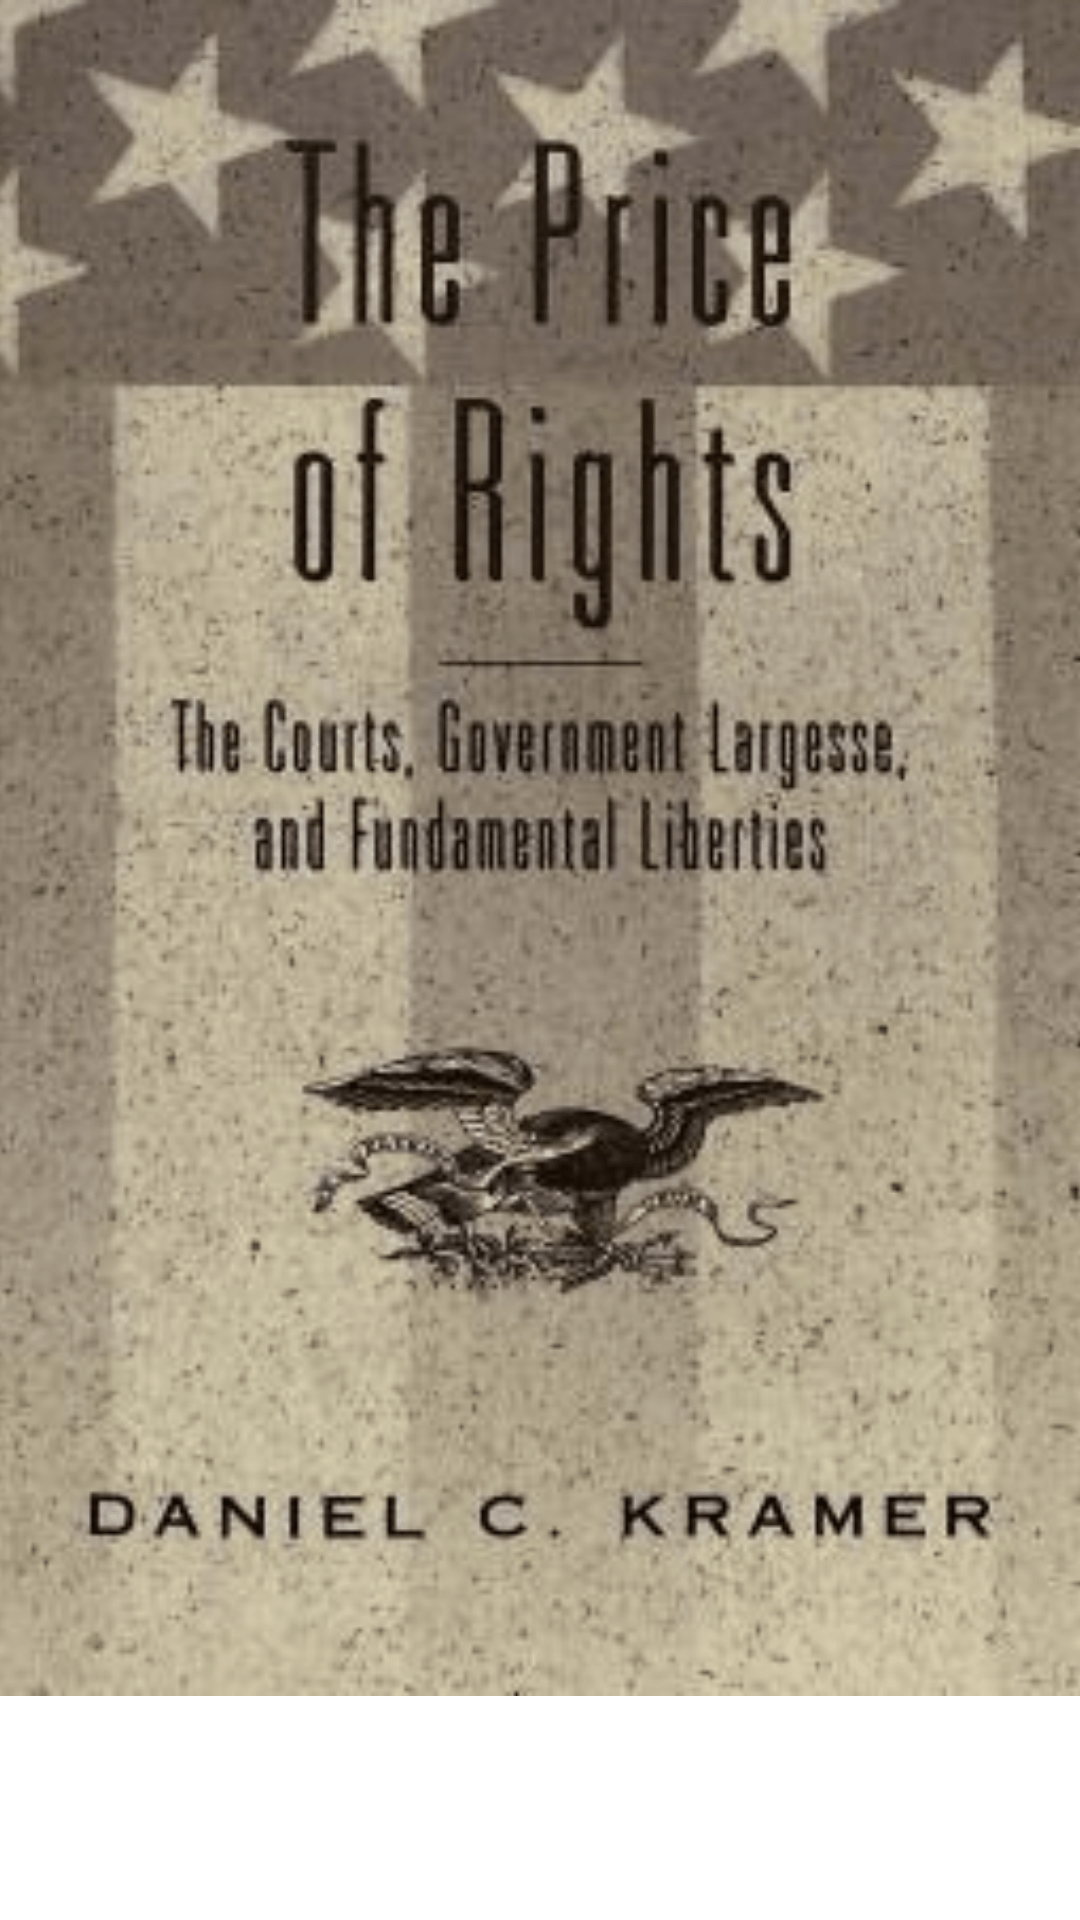 The Price of Rights: The Courts, Government Largesse, and Fundamental Liberties